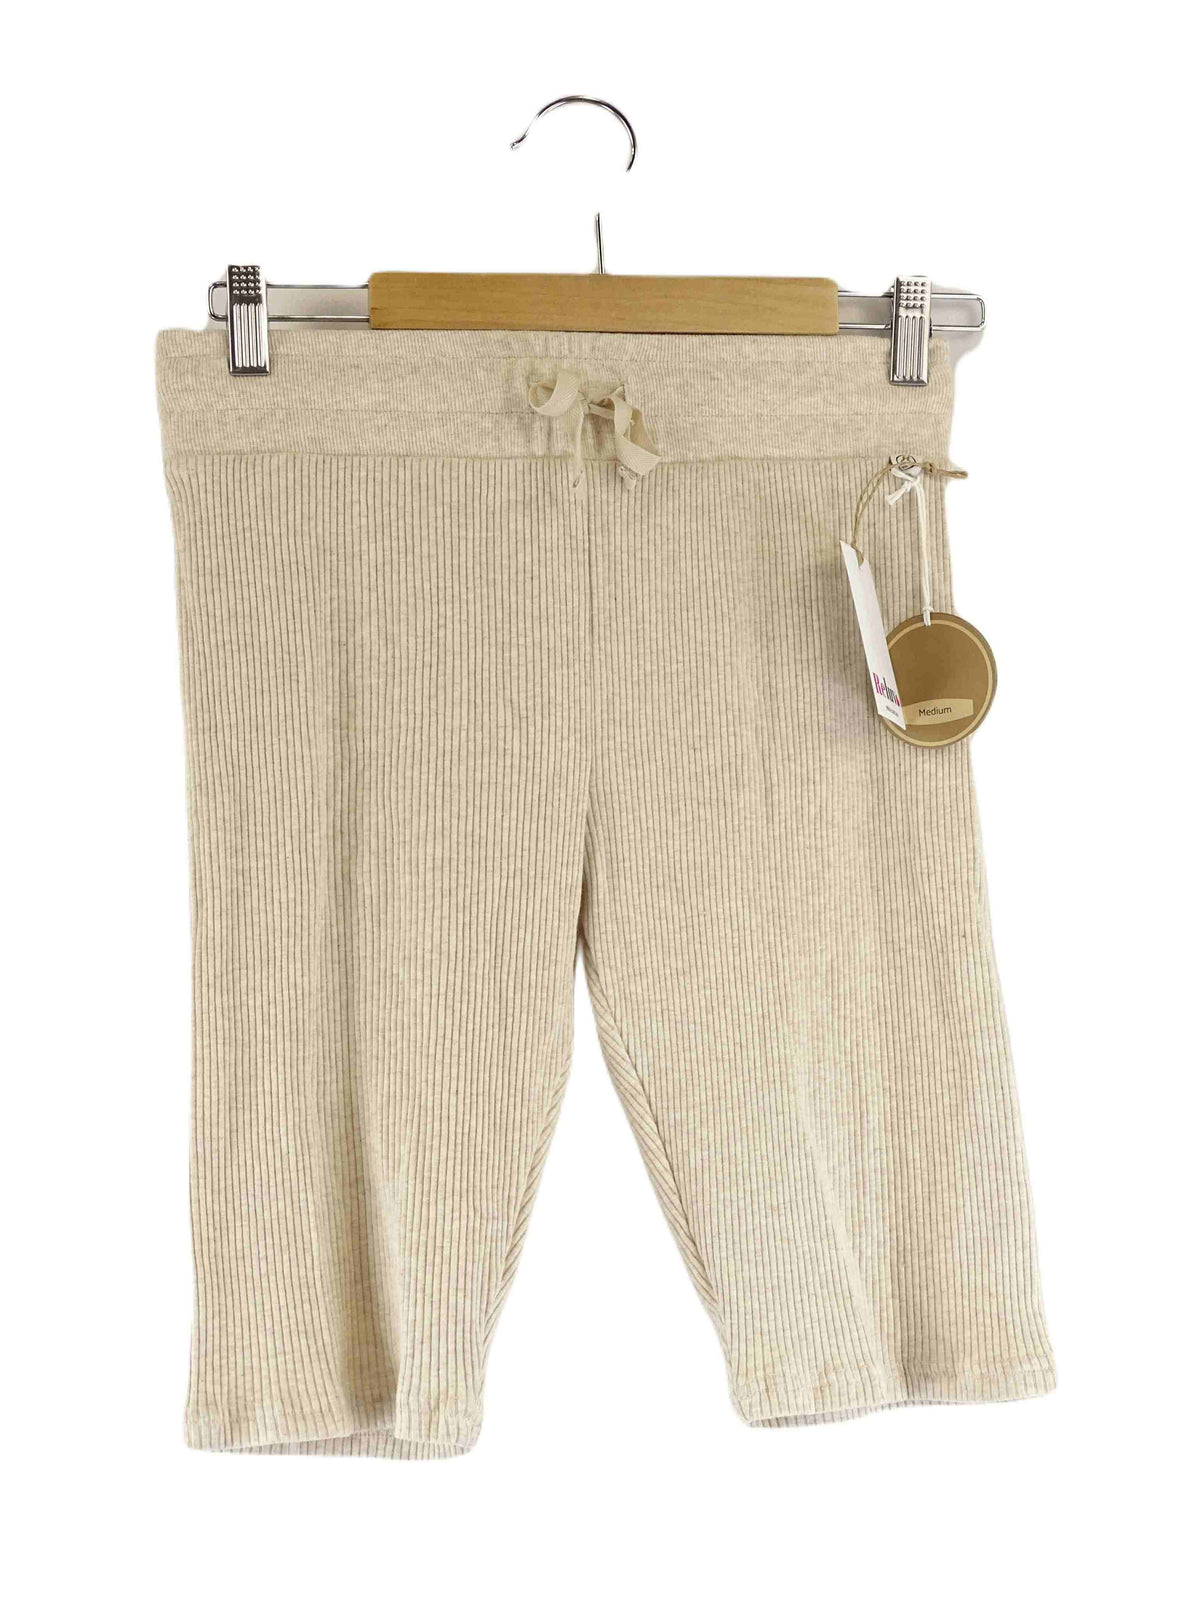 Halo and Horns Cream Shorts M